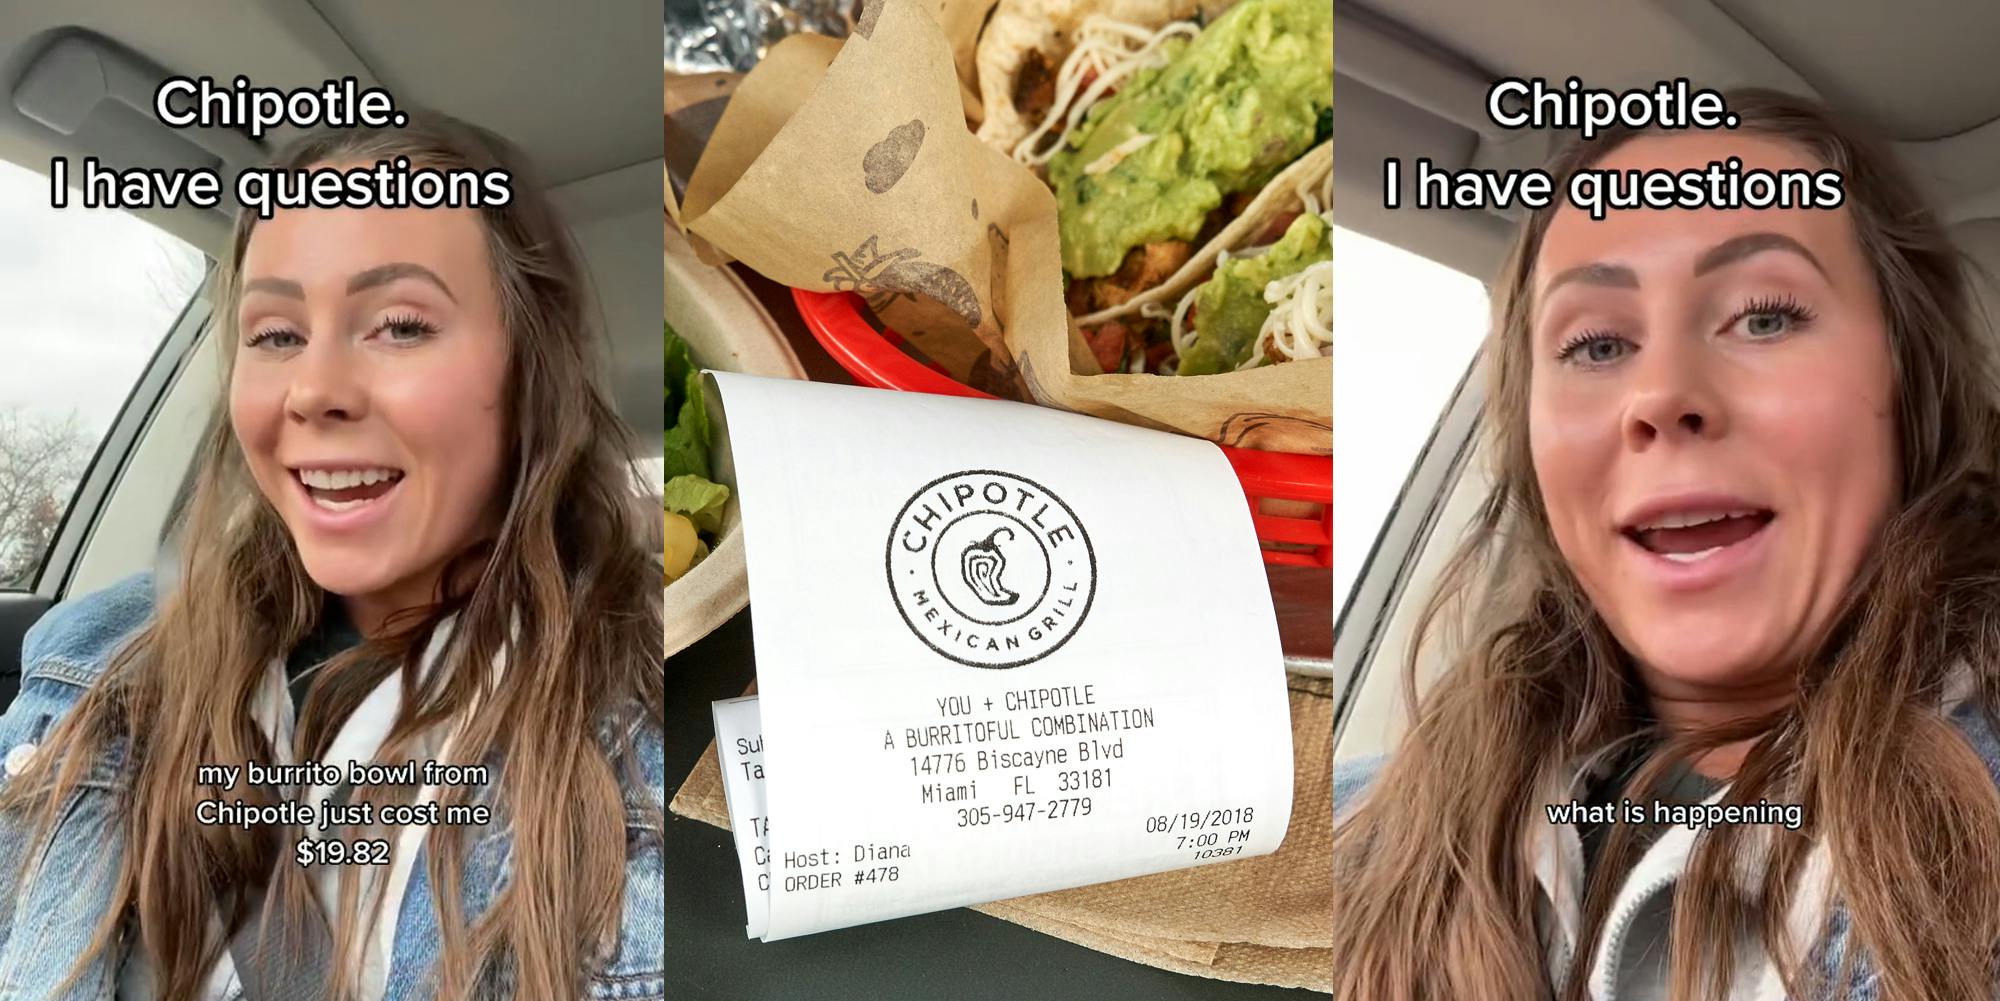 woman speaking in car with caption "Chipotle. I have questions" "my burrito bowl from Chipotle just cost me $19.82" (l) Chipotle receipt in front of food (c) woman speaking in car with caption "Chipotle. I have questions" "what is happening" (r)